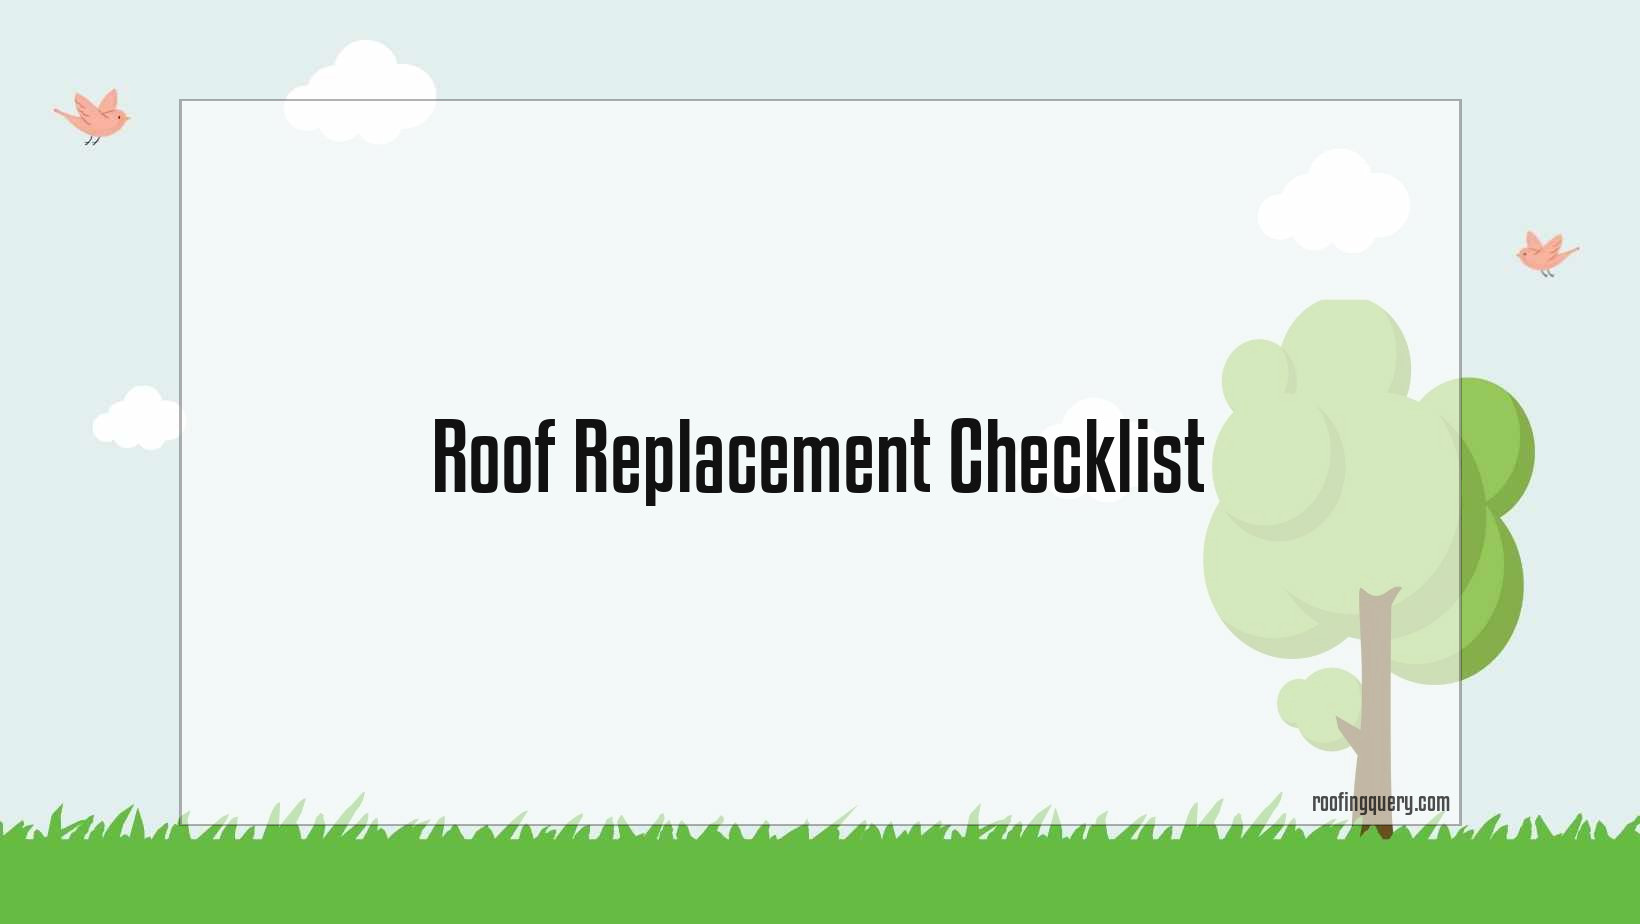 Roof Replacement Checklist